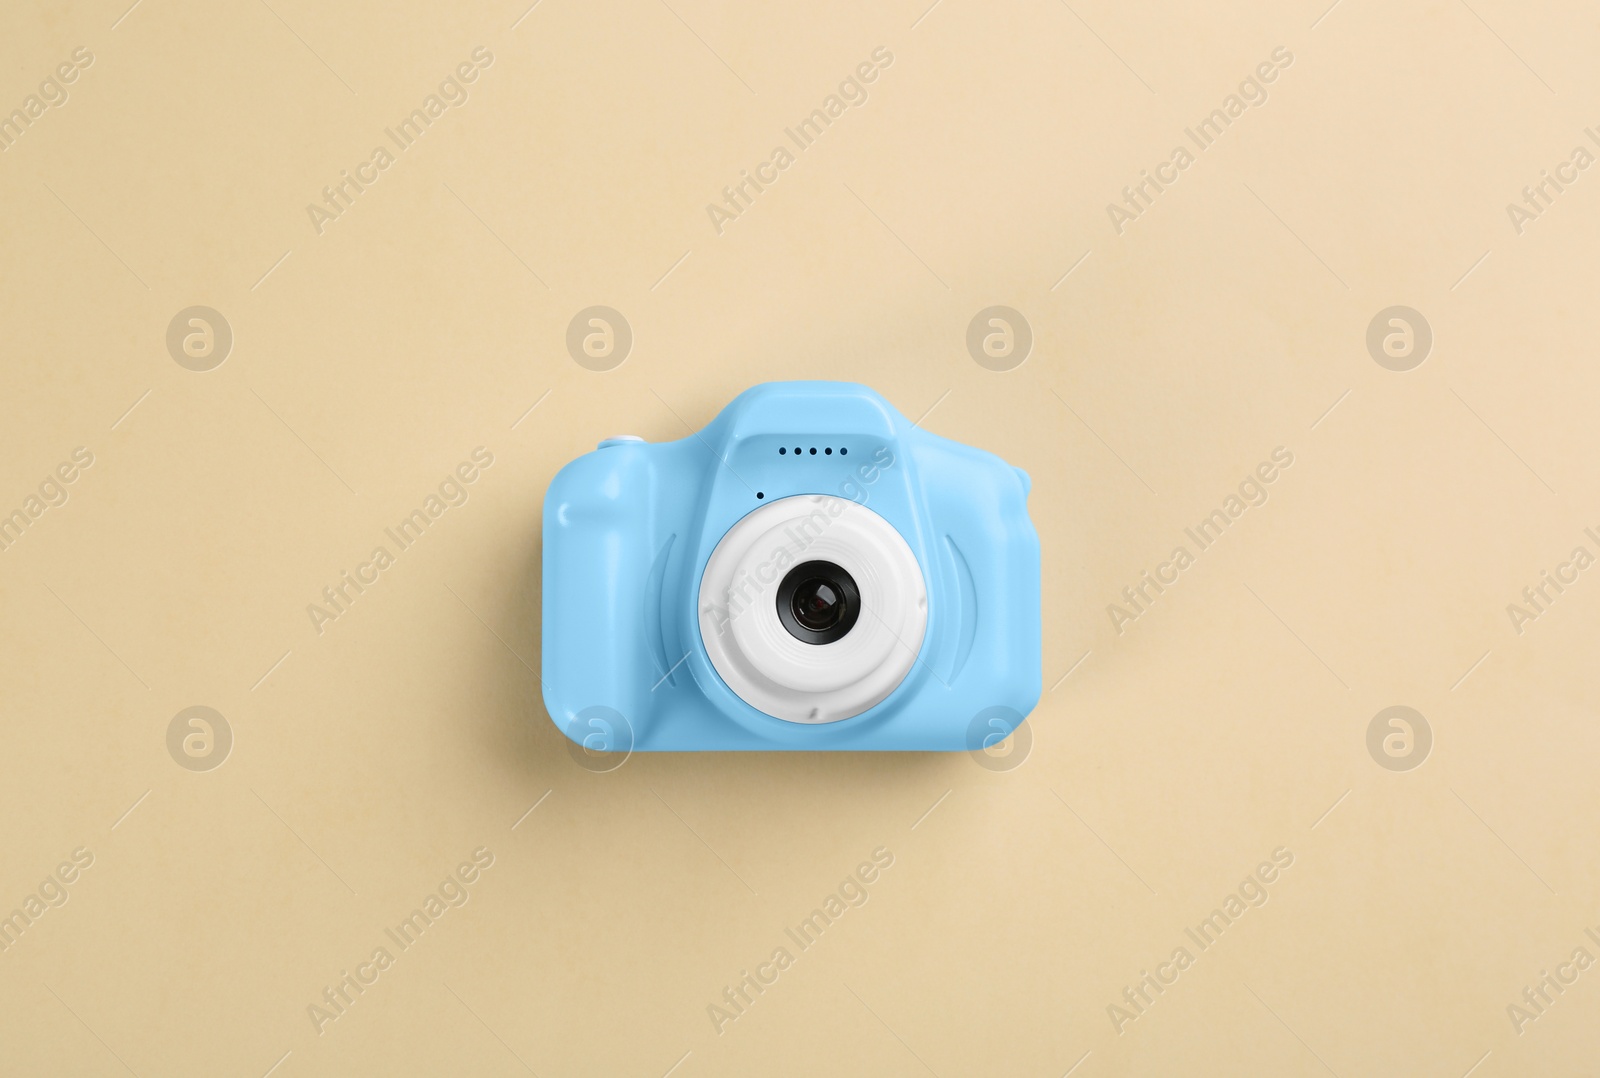 Photo of Light blue toy camera on beige background, top view